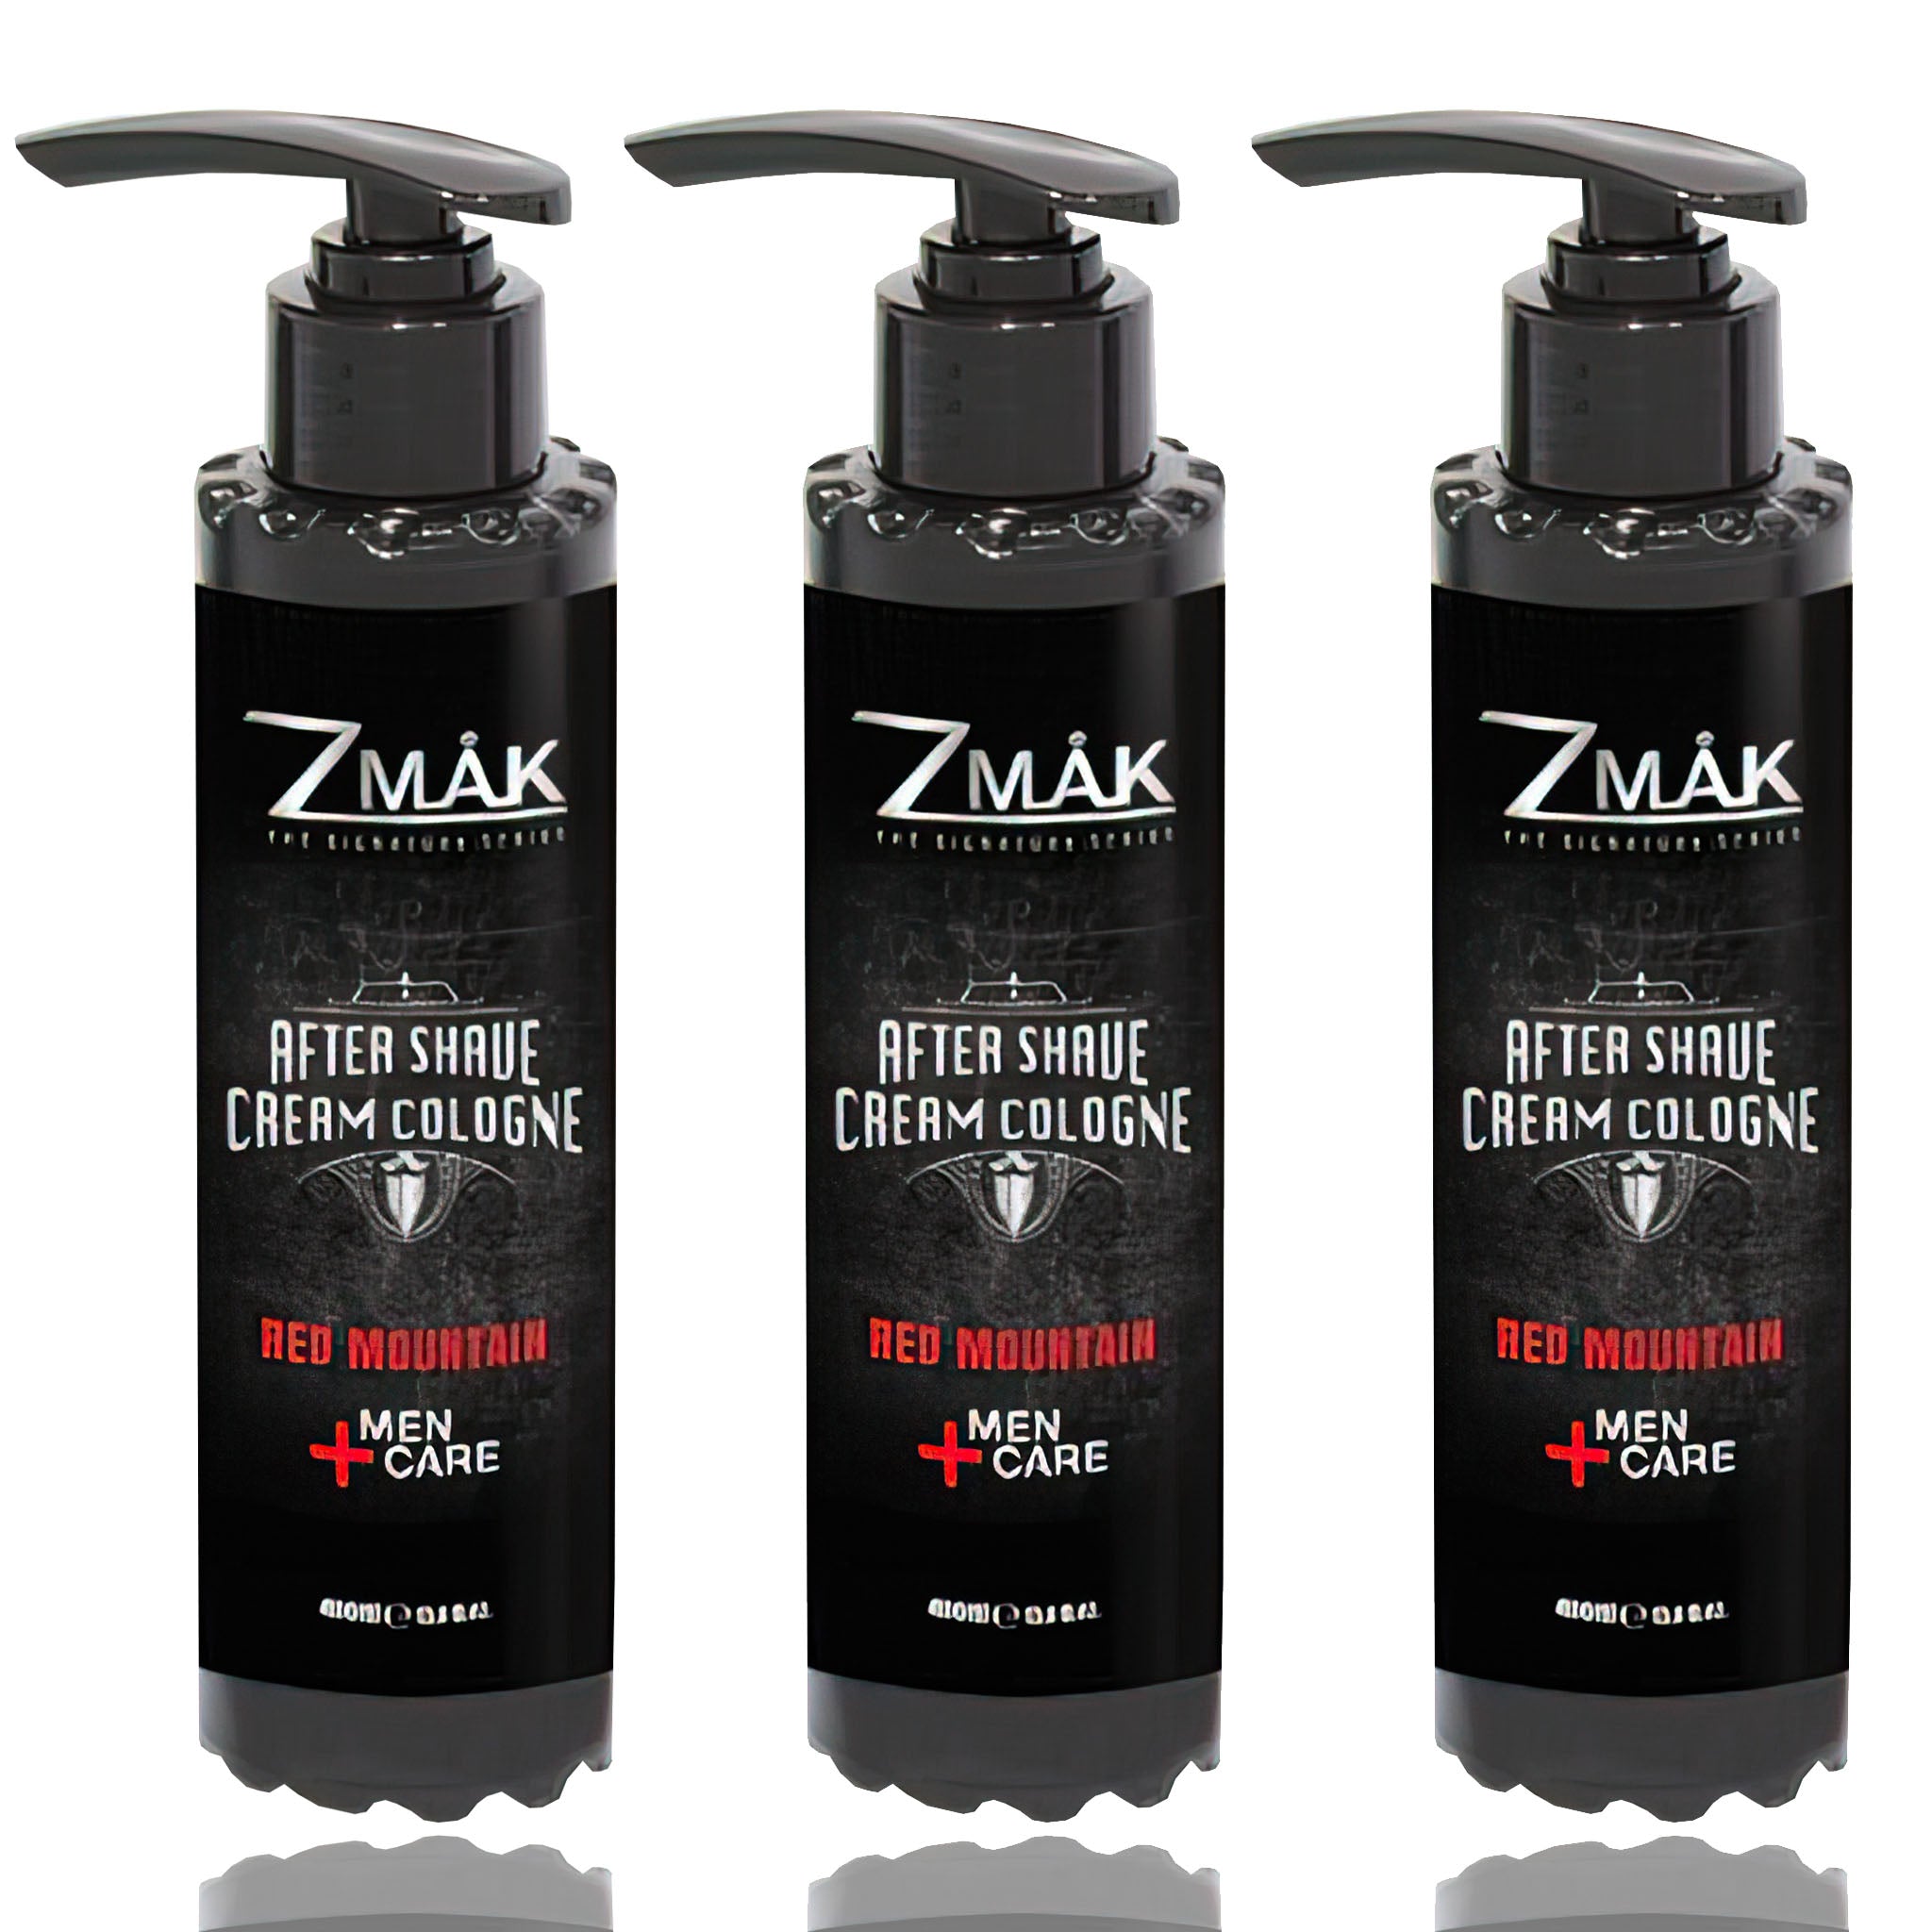 After Shave Cream Cologne - 3 Pack of Red Mountain - 13.86 fl oz. - ZMAK The Signature Series